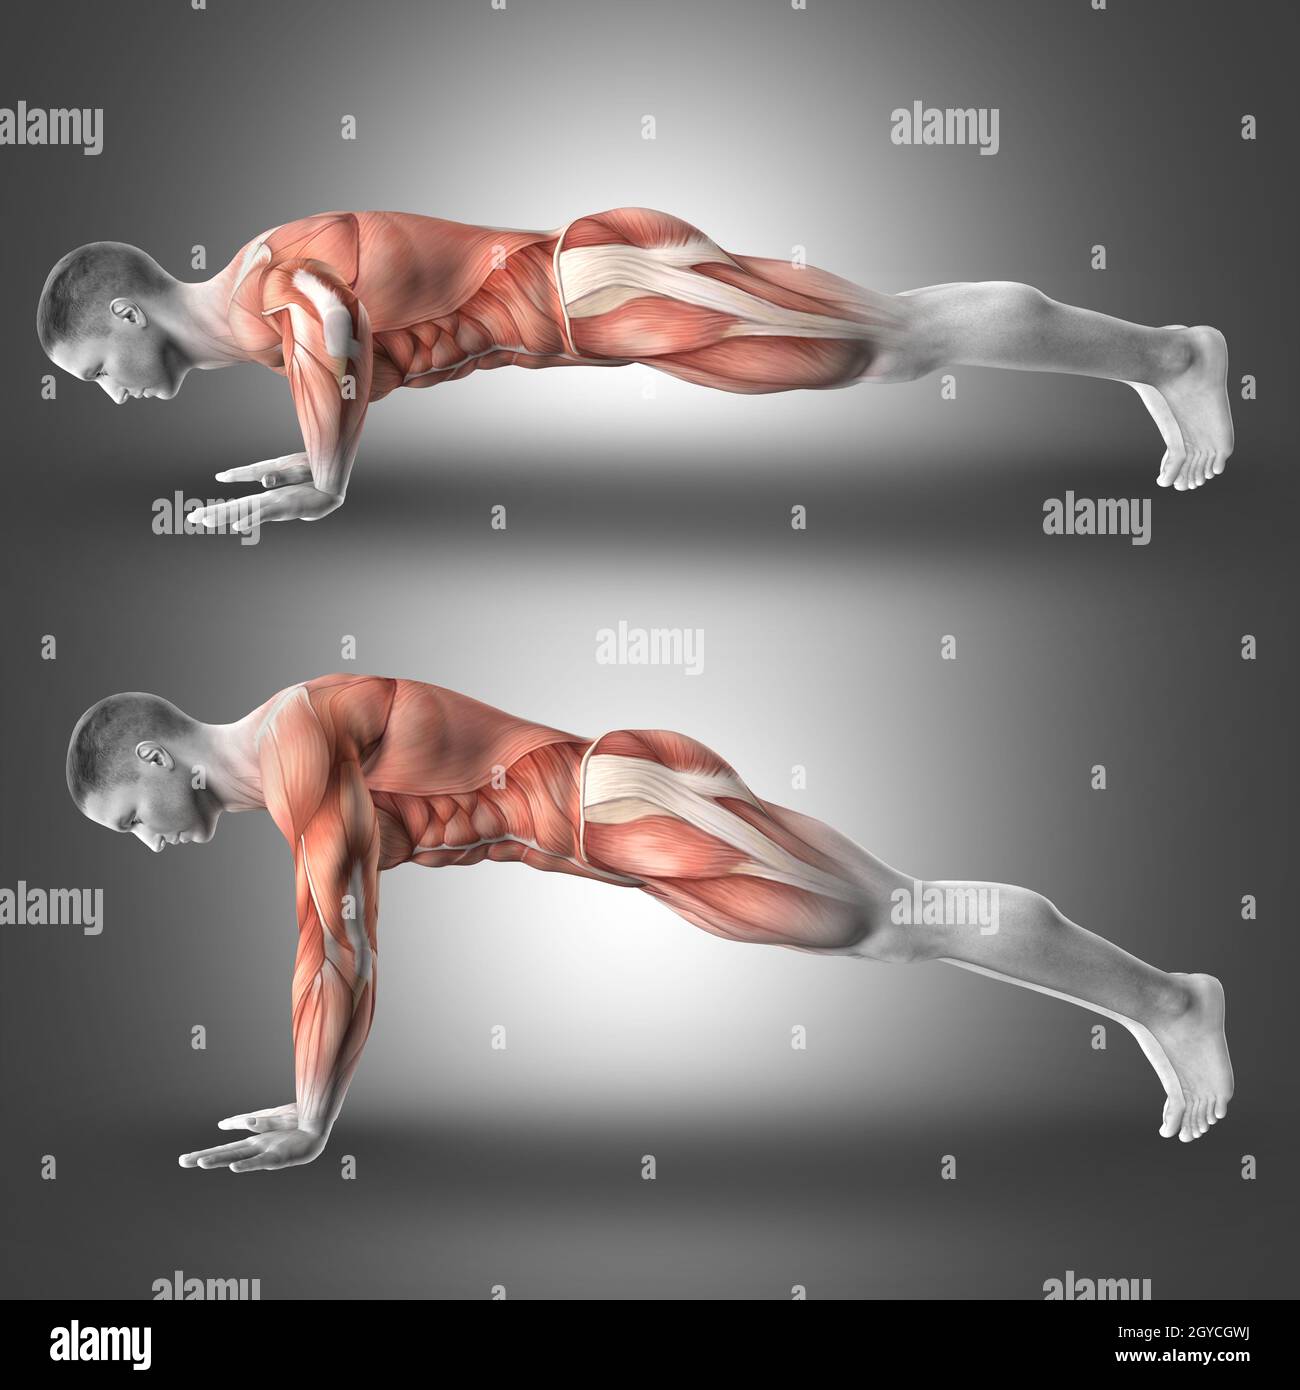 Silhouette with man push ups initial pose Vector Image